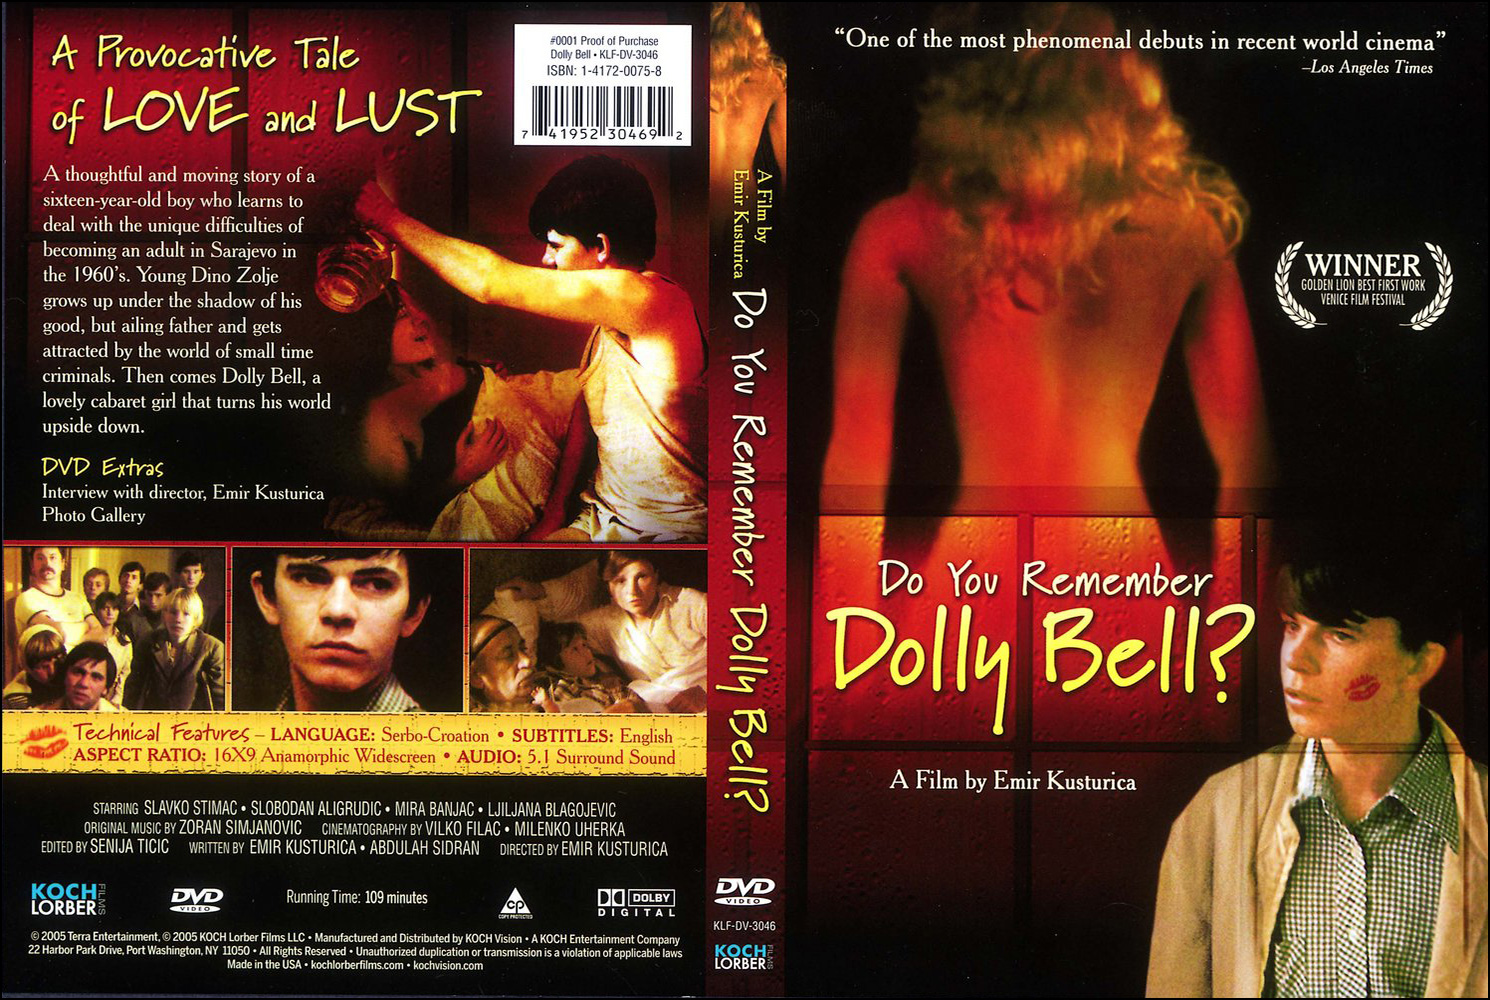 Click to view full size image -  DVD Cover - S - DVD - SJECAS LI SE DOLLY BELL - ENG - DVD - SJECAS LI SE DOLLY BELL - ENG.jpg